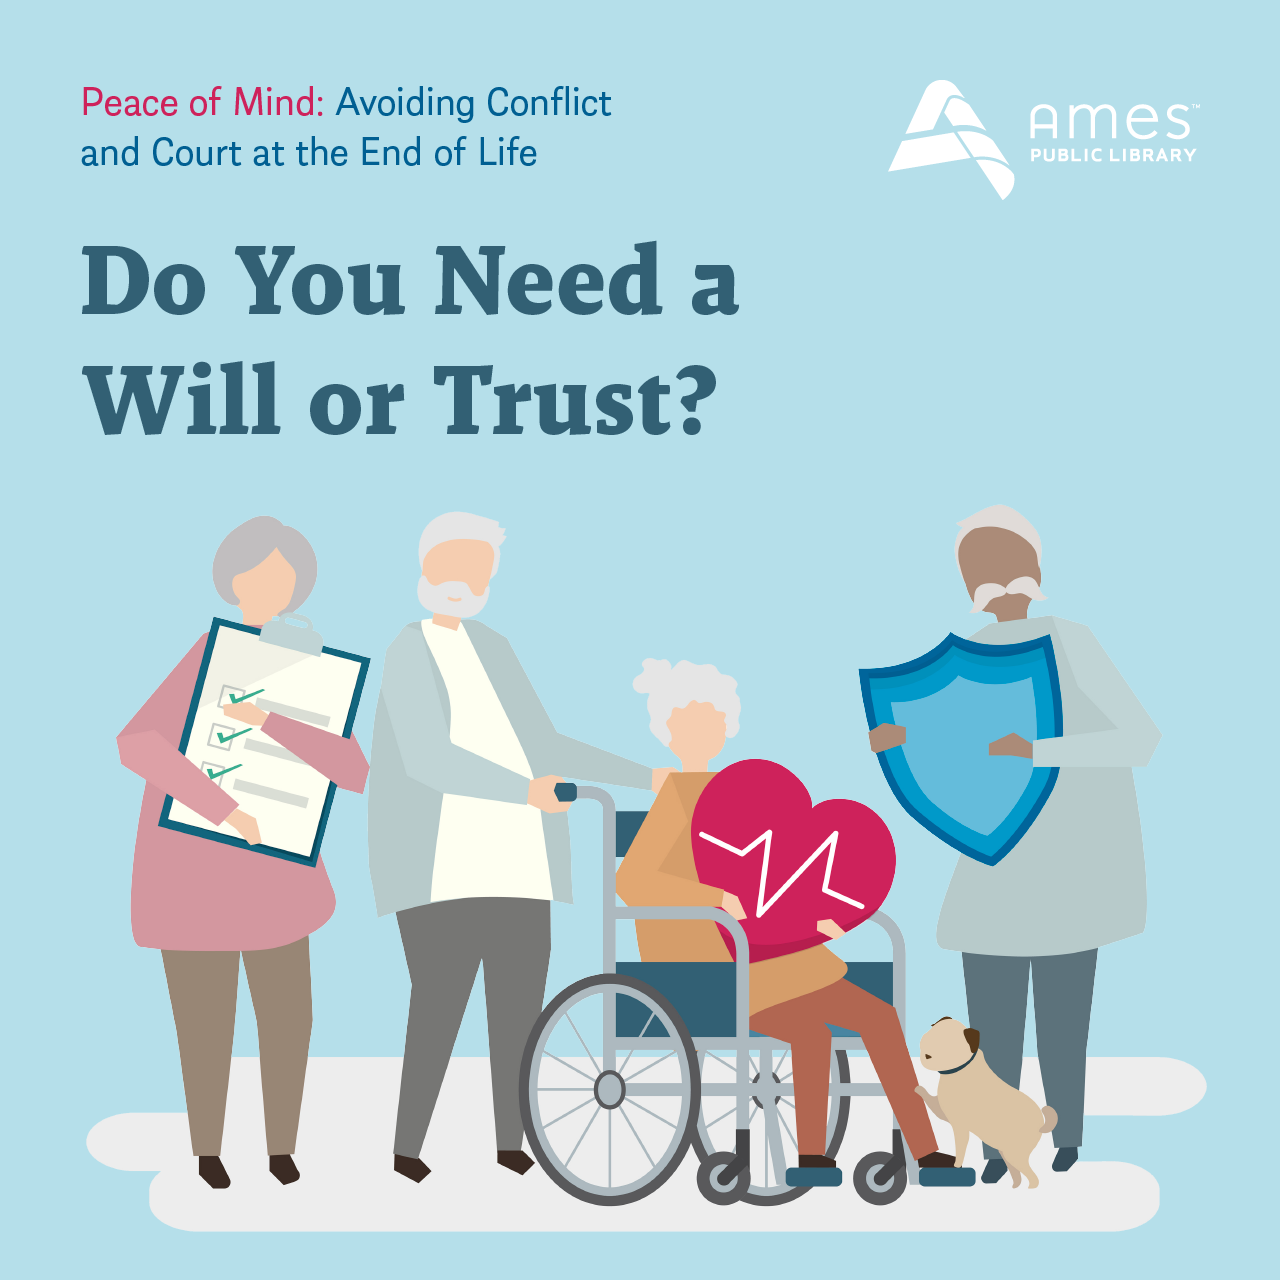 Peace of Mind: Avoiding Conflict & Court at the End of Life. Do You Need a Will or Trust?